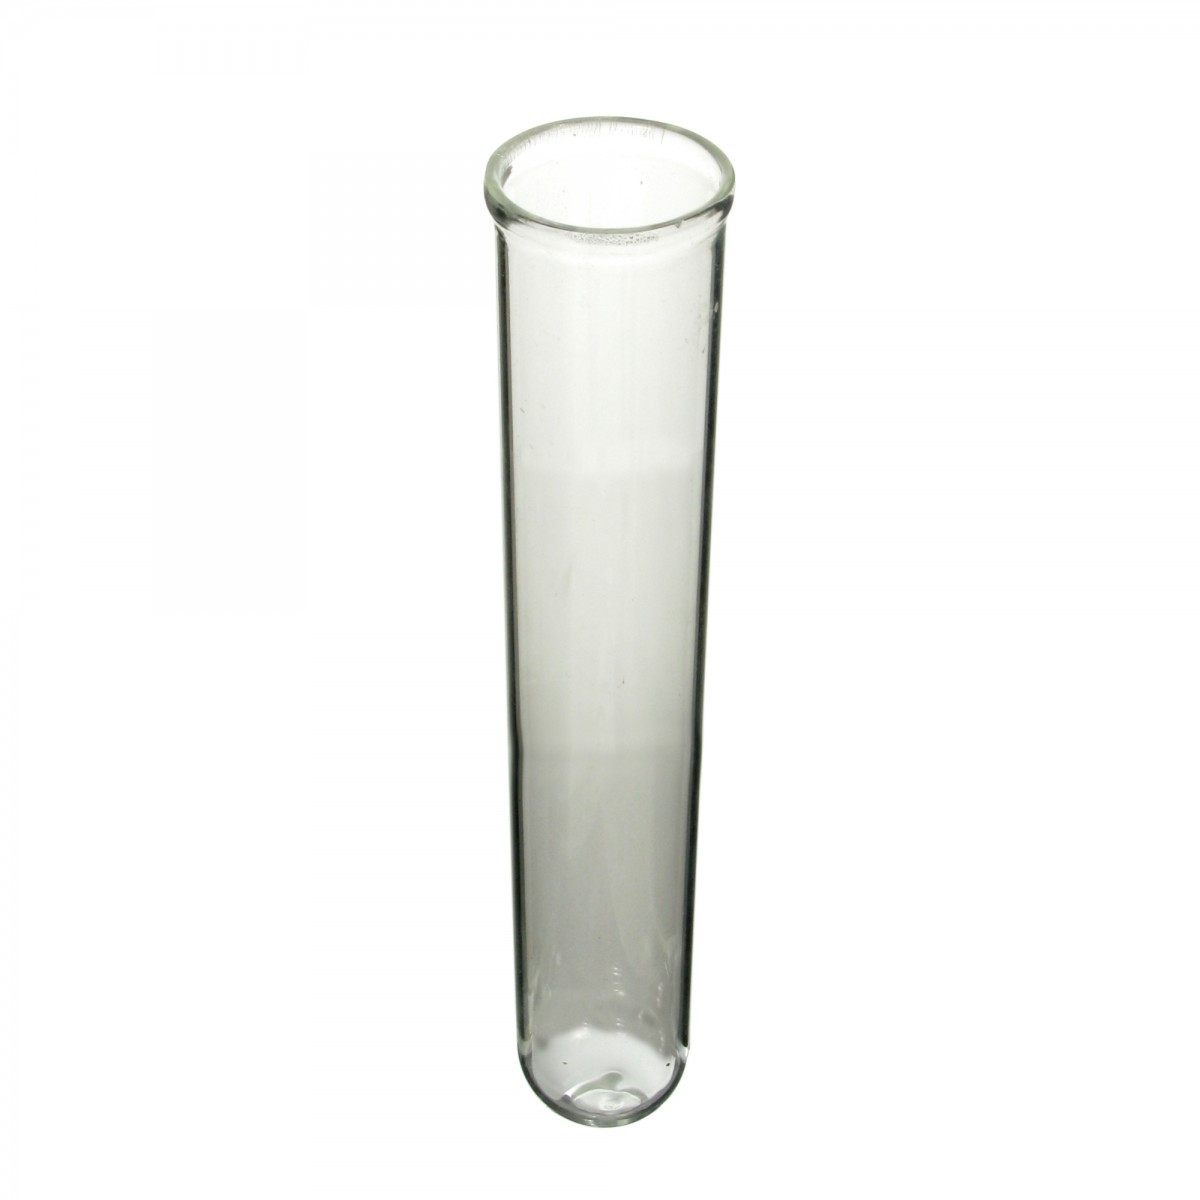 13 Wonderful Glass Test Tube Vases 2024 free download glass test tube vases of 7 340lgc test tubes 25 od x 150mm l stopper size 4 72 pk pertaining to test tubes 25 od x 150mm l stopper size 4 72